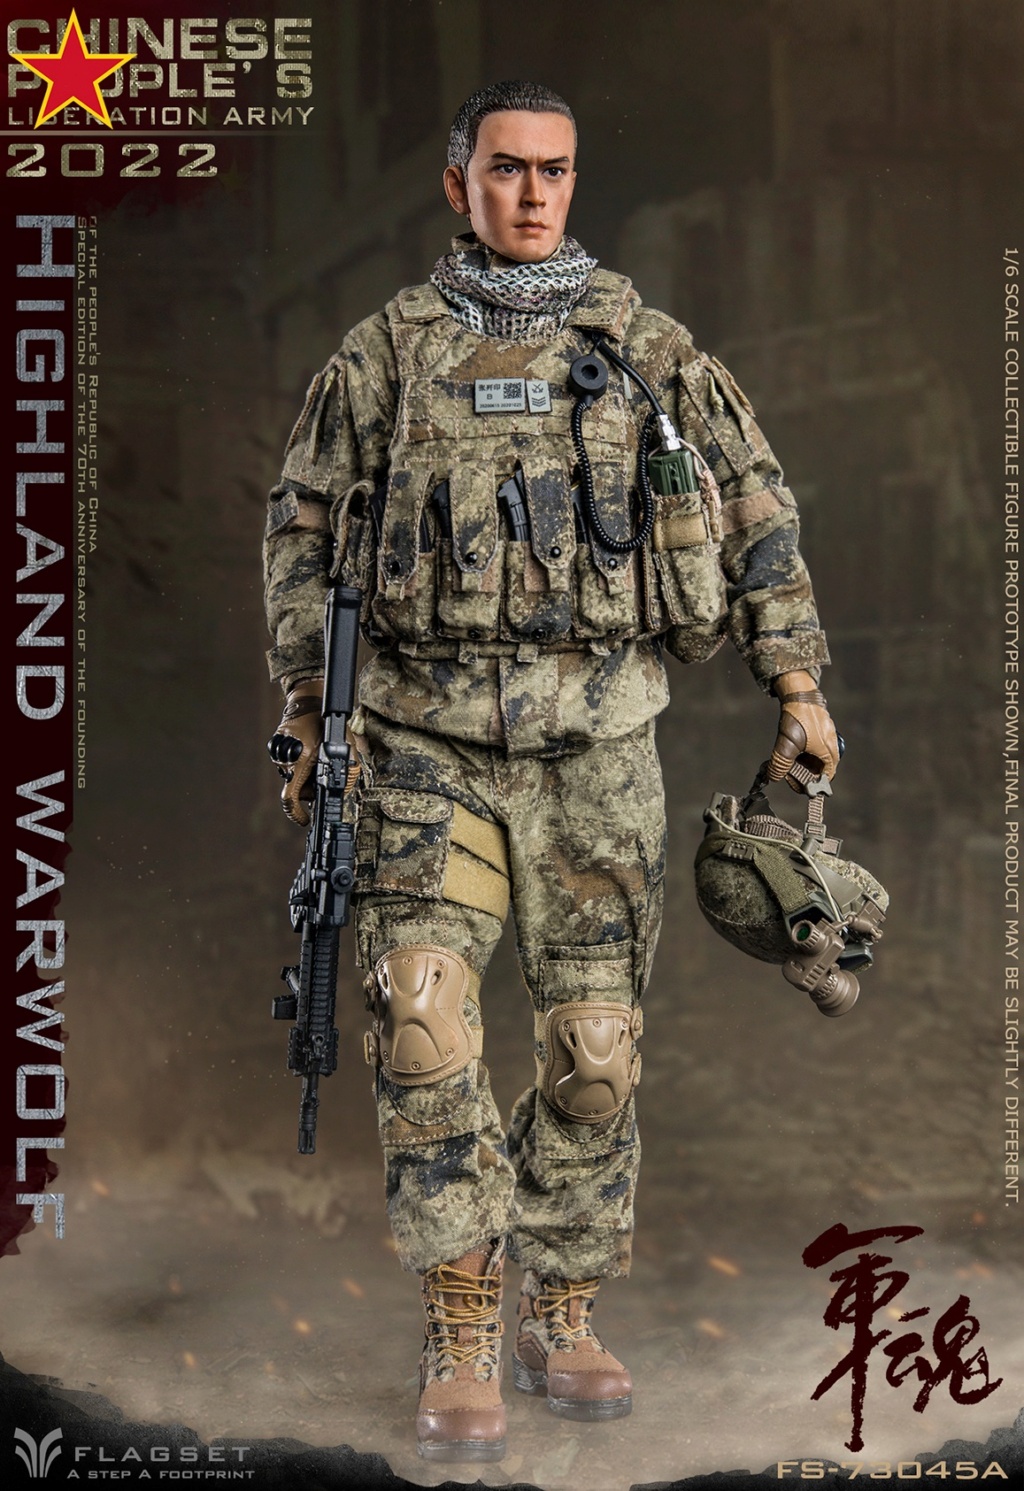 flagset - NEW PRODUCT: Flagset: 1/6 People's Chinese Liberation Army Series - Highland Warwolf /Sniper #FS-73045A/B 12545810